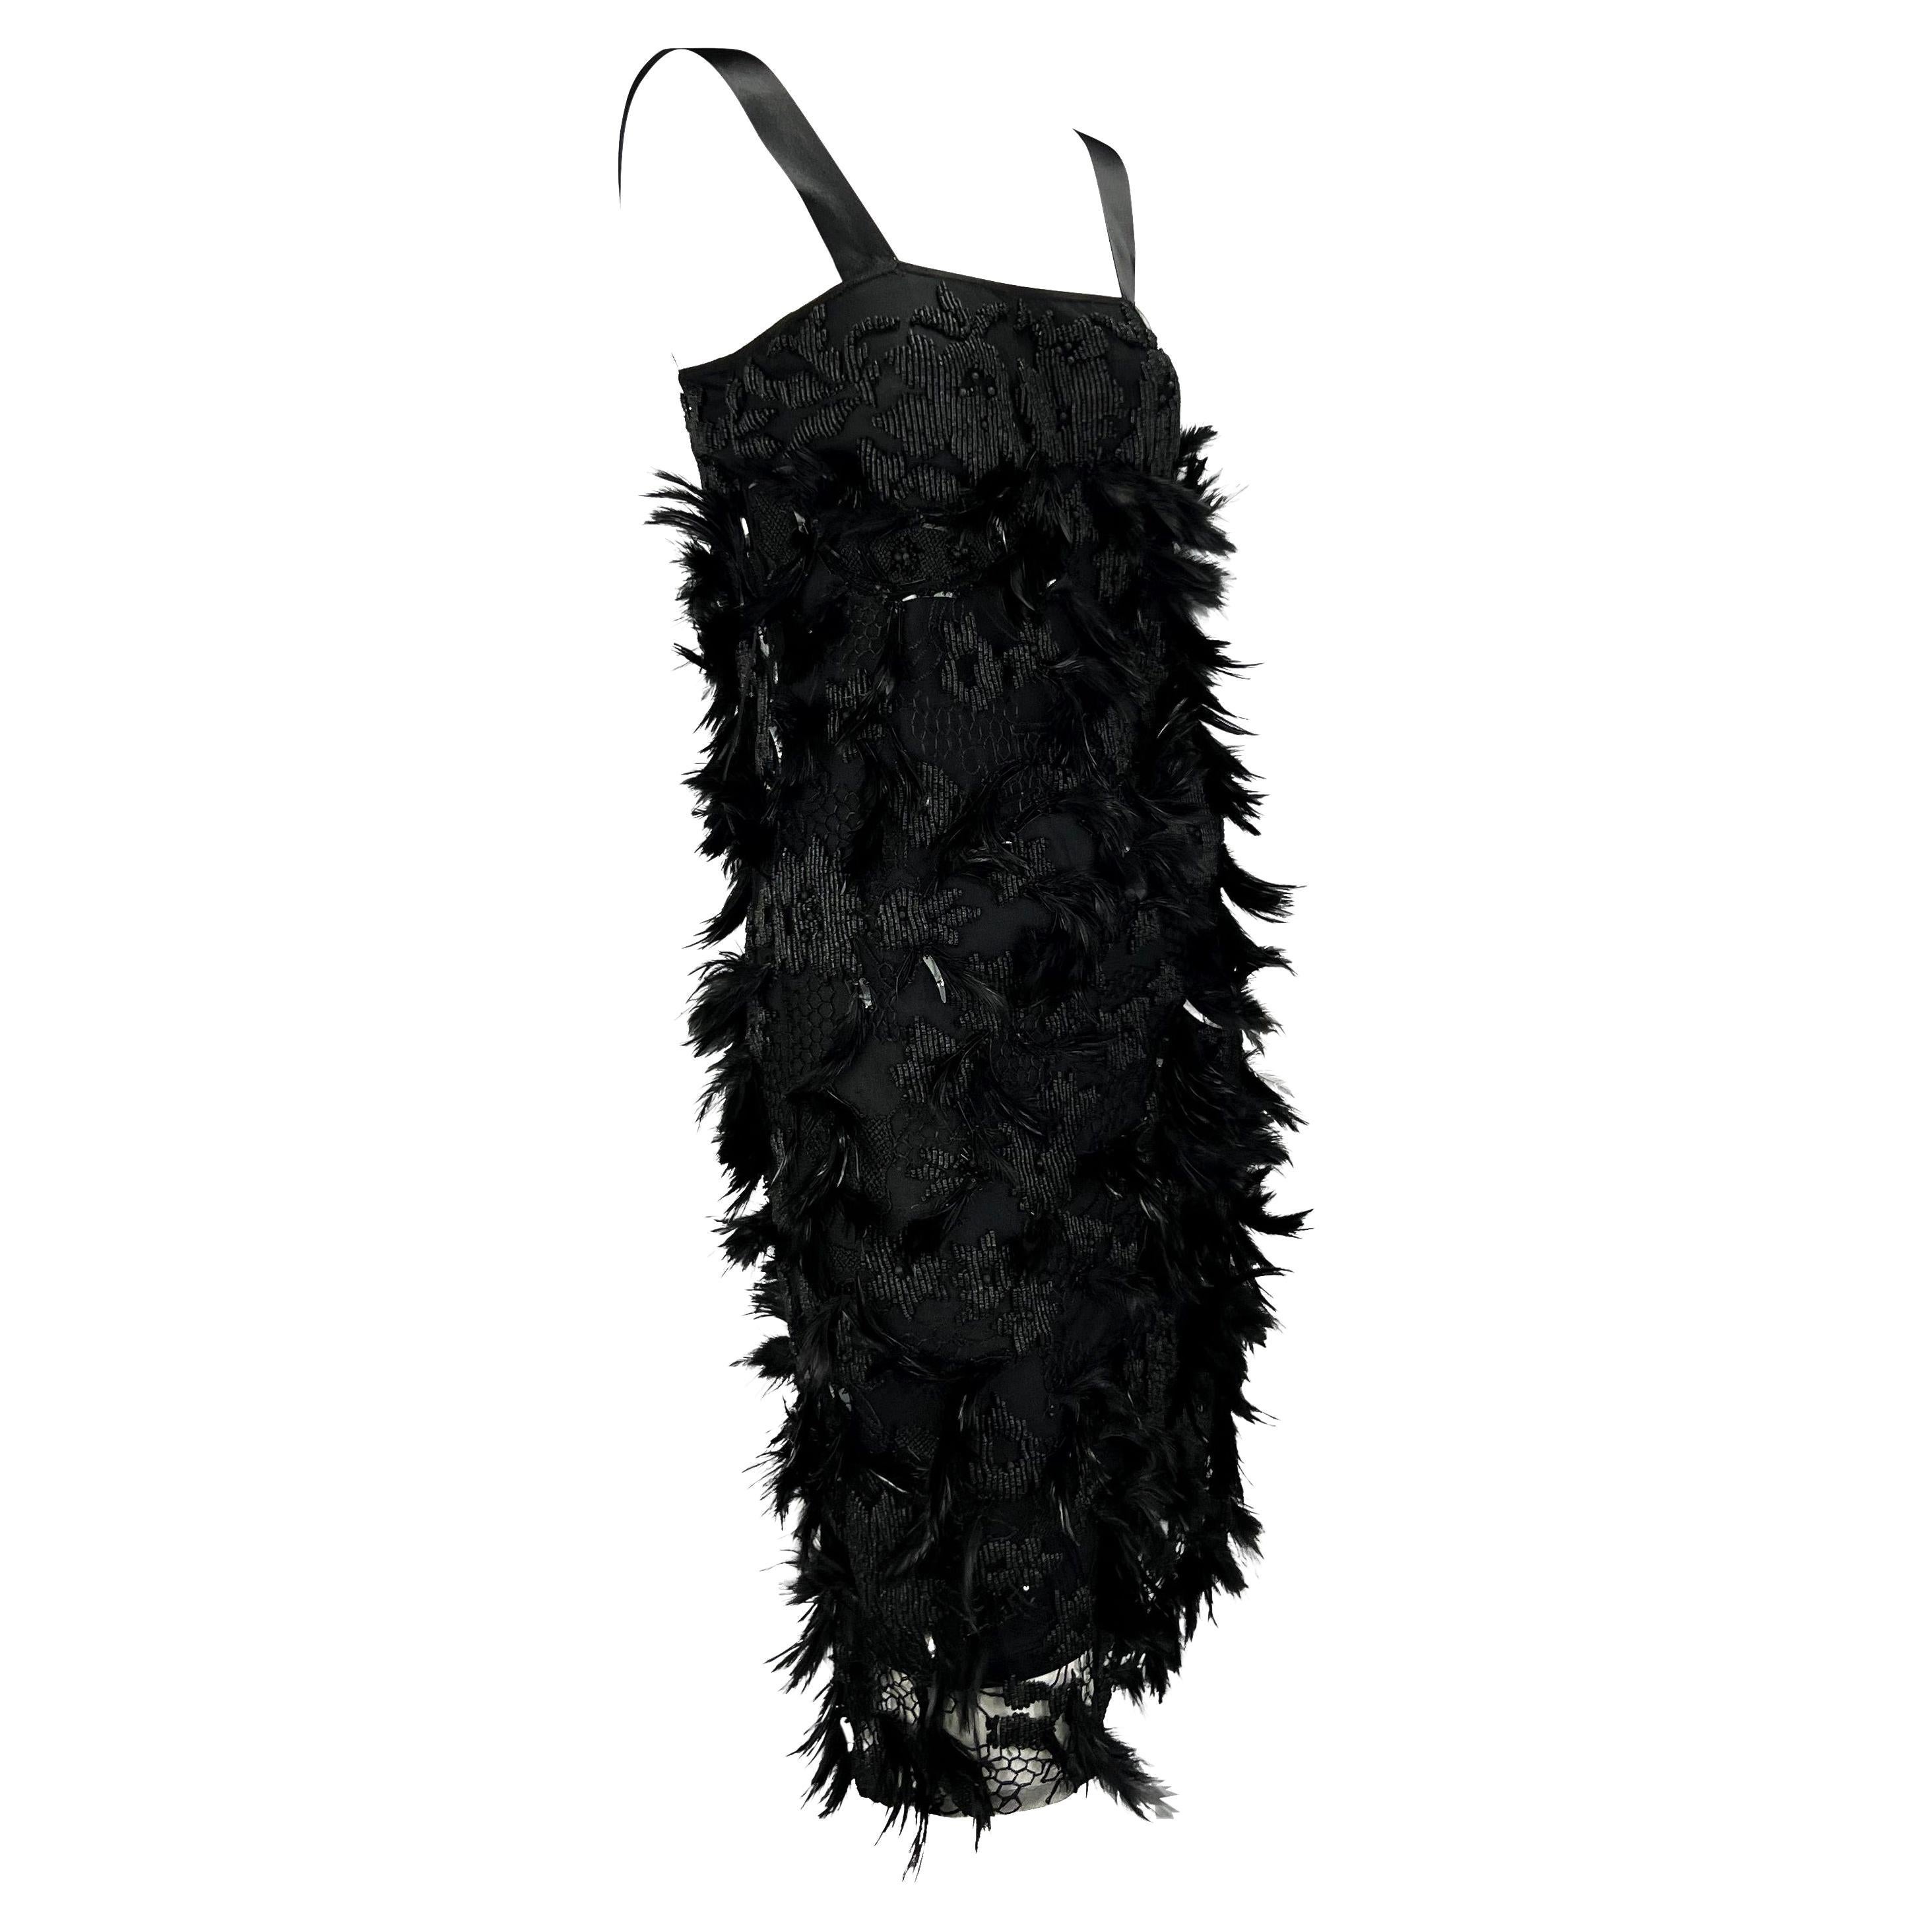 S/S 2001 Yves Saint Laurent by Tom Ford Runway Feather Beaded Ribbon Dress For Sale 2